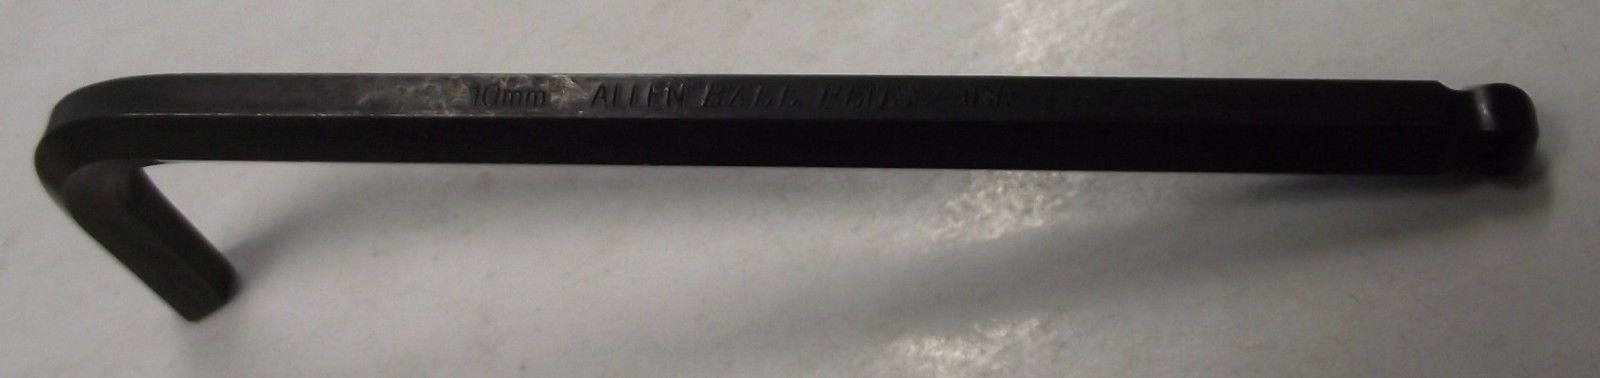 Allen 59116 10mm Long Arm L Hex Key With Ball-Plus Ball End USA